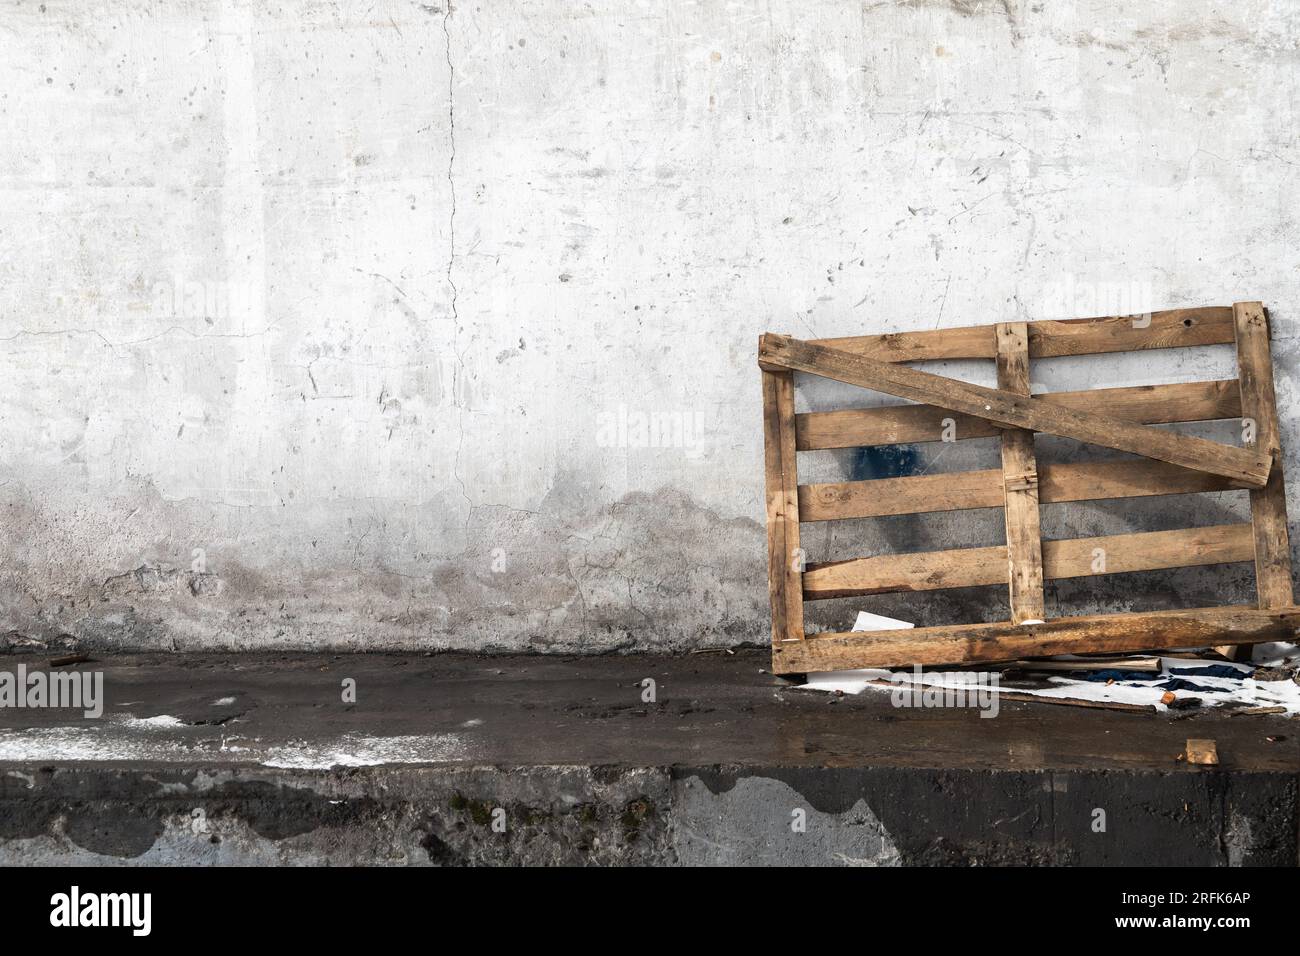 A wooden pallet stands leaned against the wall in the loading area Stock Photo